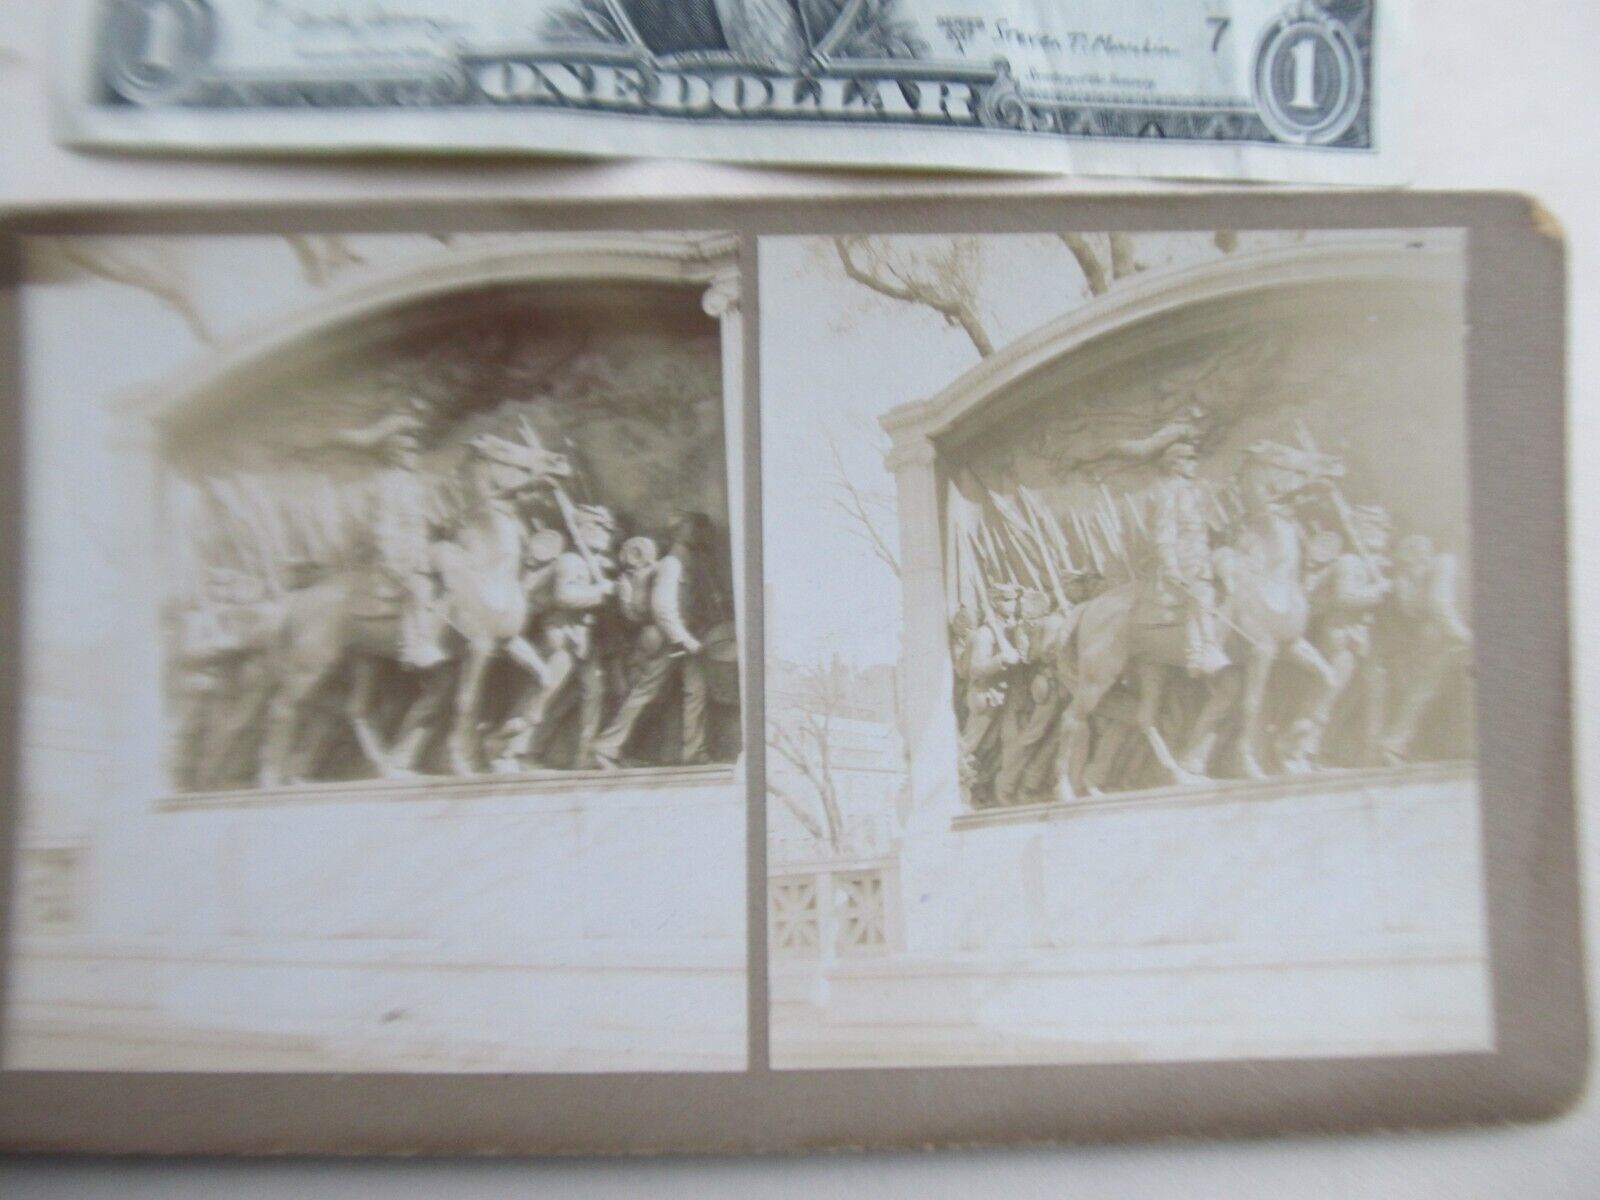 Rare 1890 Stereo Photo Card, 54th Mass. Colored Inf, Shaw, African American, GAR